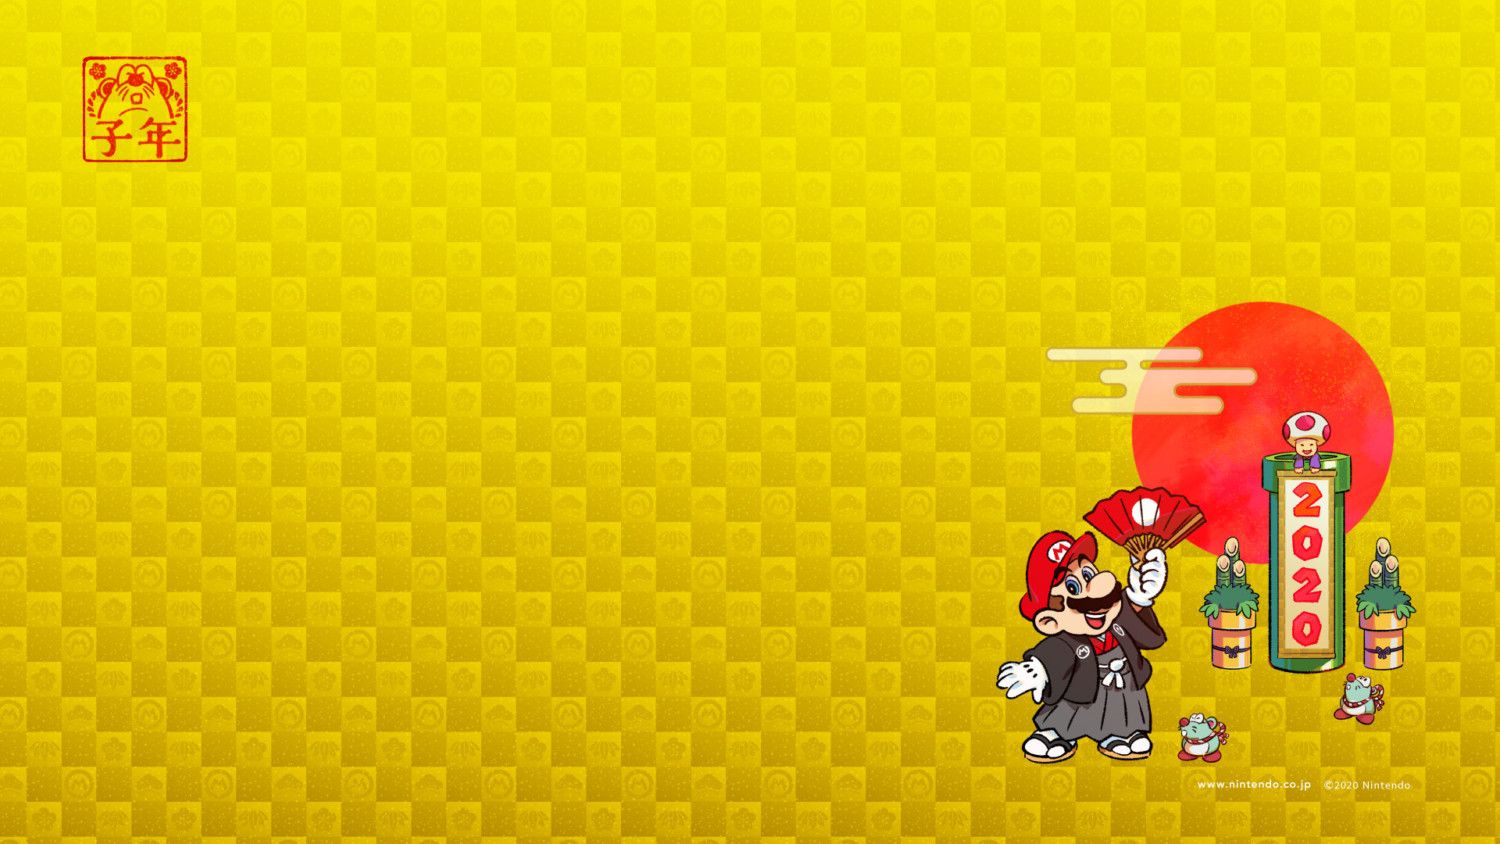 My Nintendo Japan Now Offering Mario Themed New Year's Wallpaper For Free